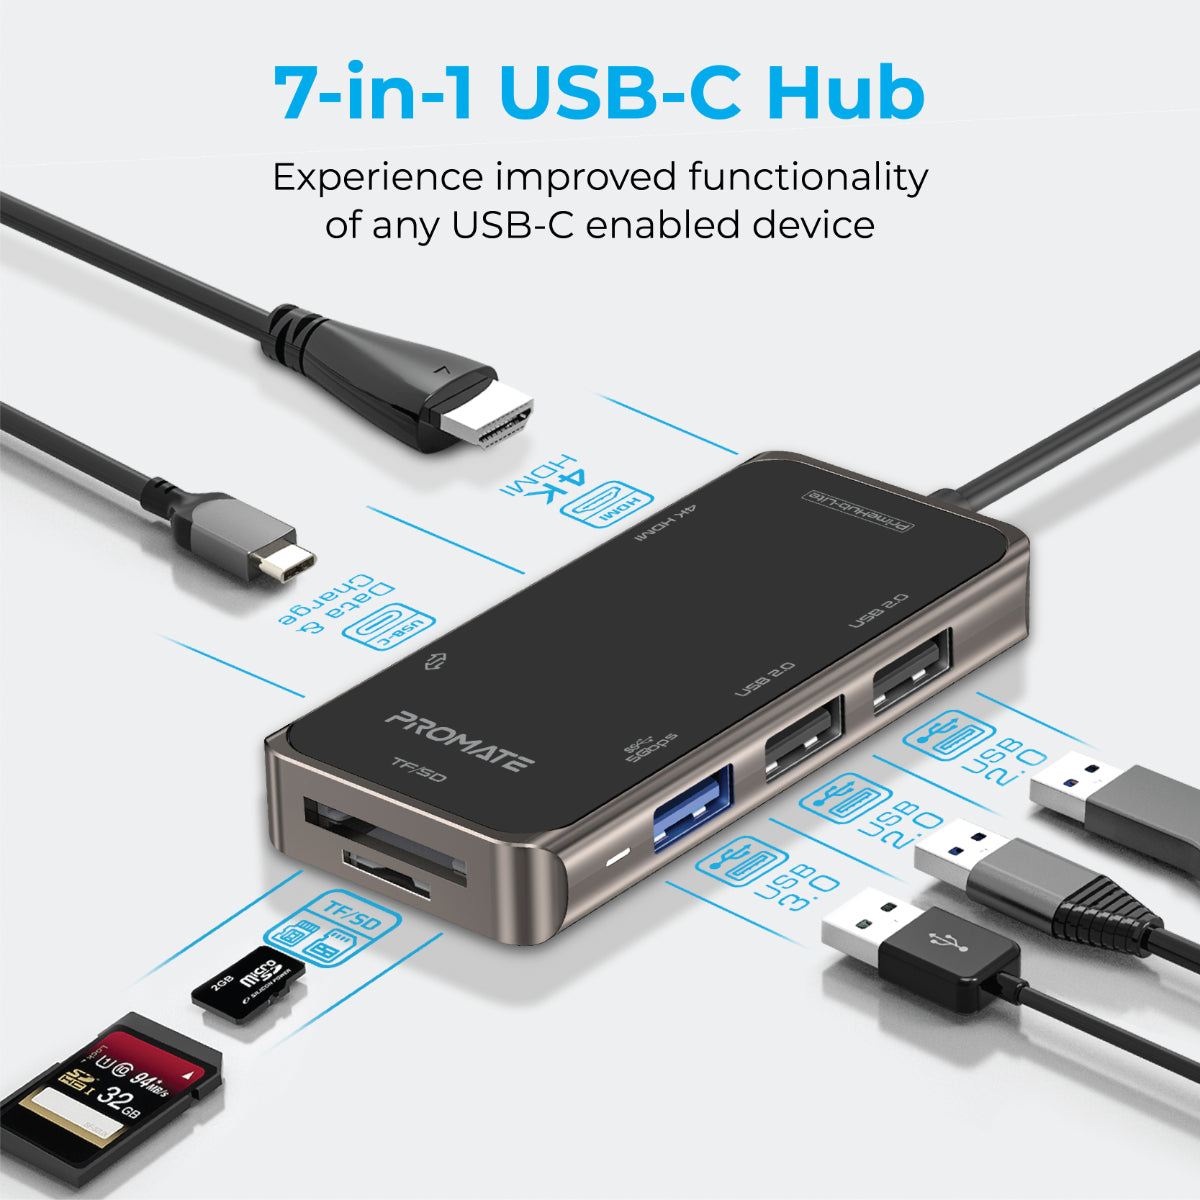 Promate USB-C Hub, 7-in-1 Multi-Port Adapter with 4K HDMI, Sync Charge USB-C Port, TF/SD Card Slot, 3 USB Ports and 5Gbps Data Transfer for MacBook Pro, MacBook Air, Chromebook, PrimeHub-Lite